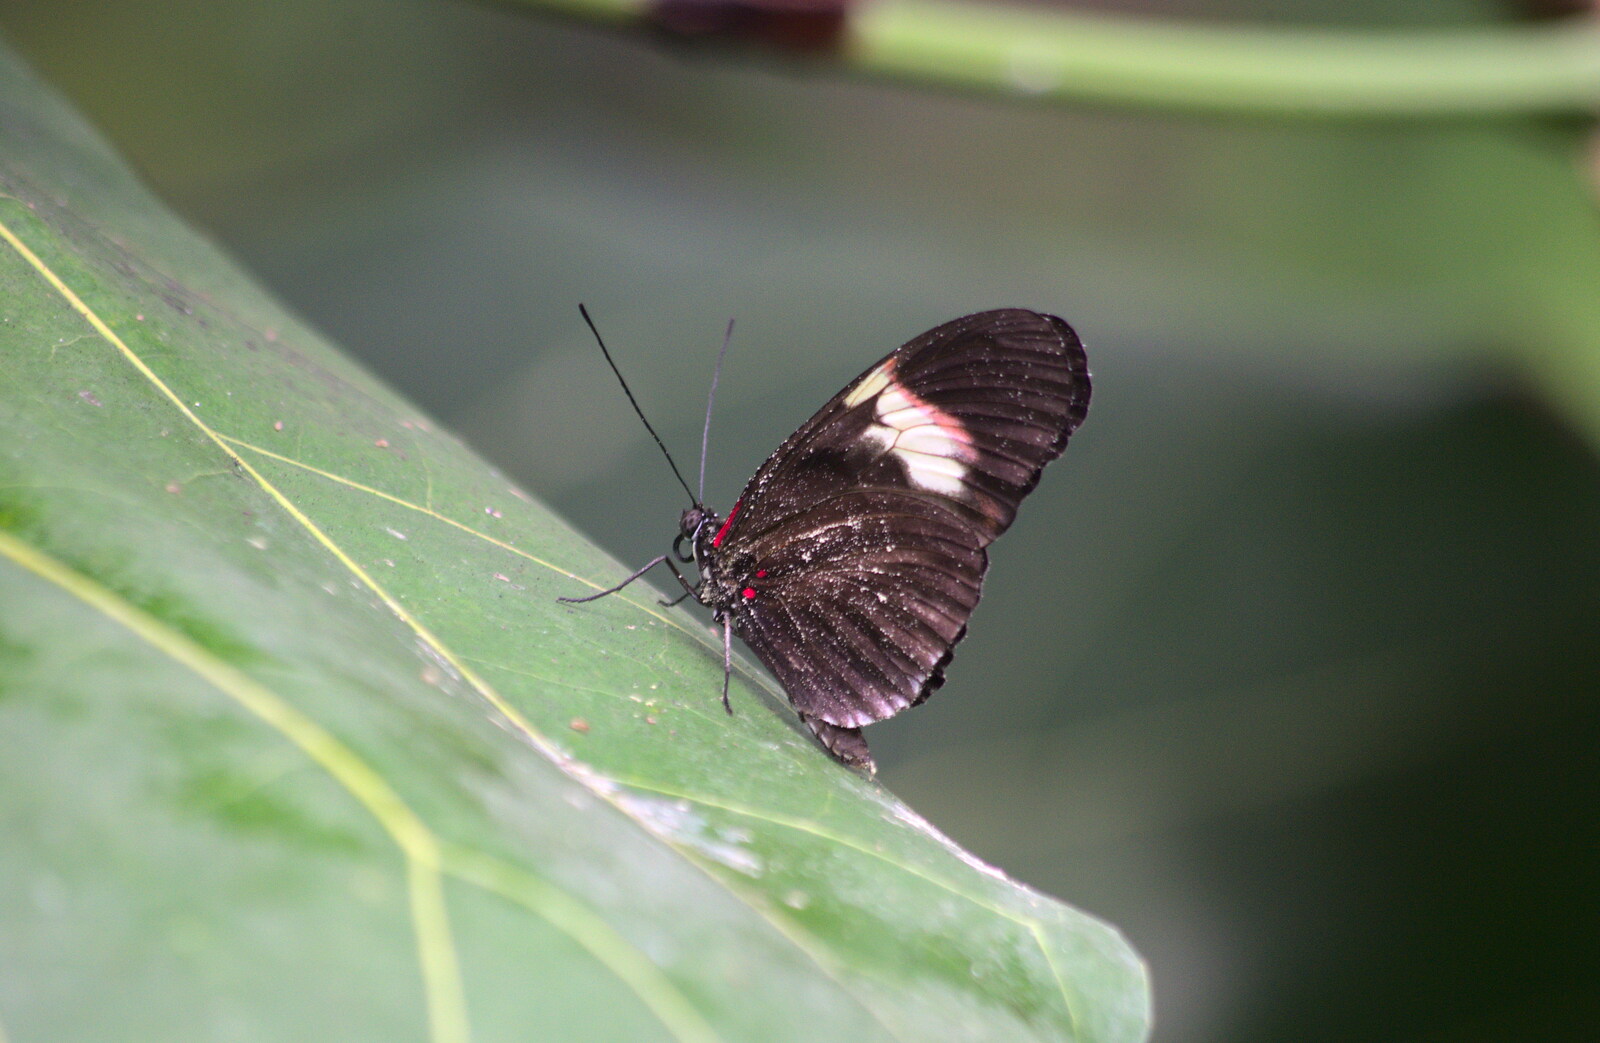 A Birthday Trip to the Zoo, Banham, Norfolk - 26th May 2014: A butterfly